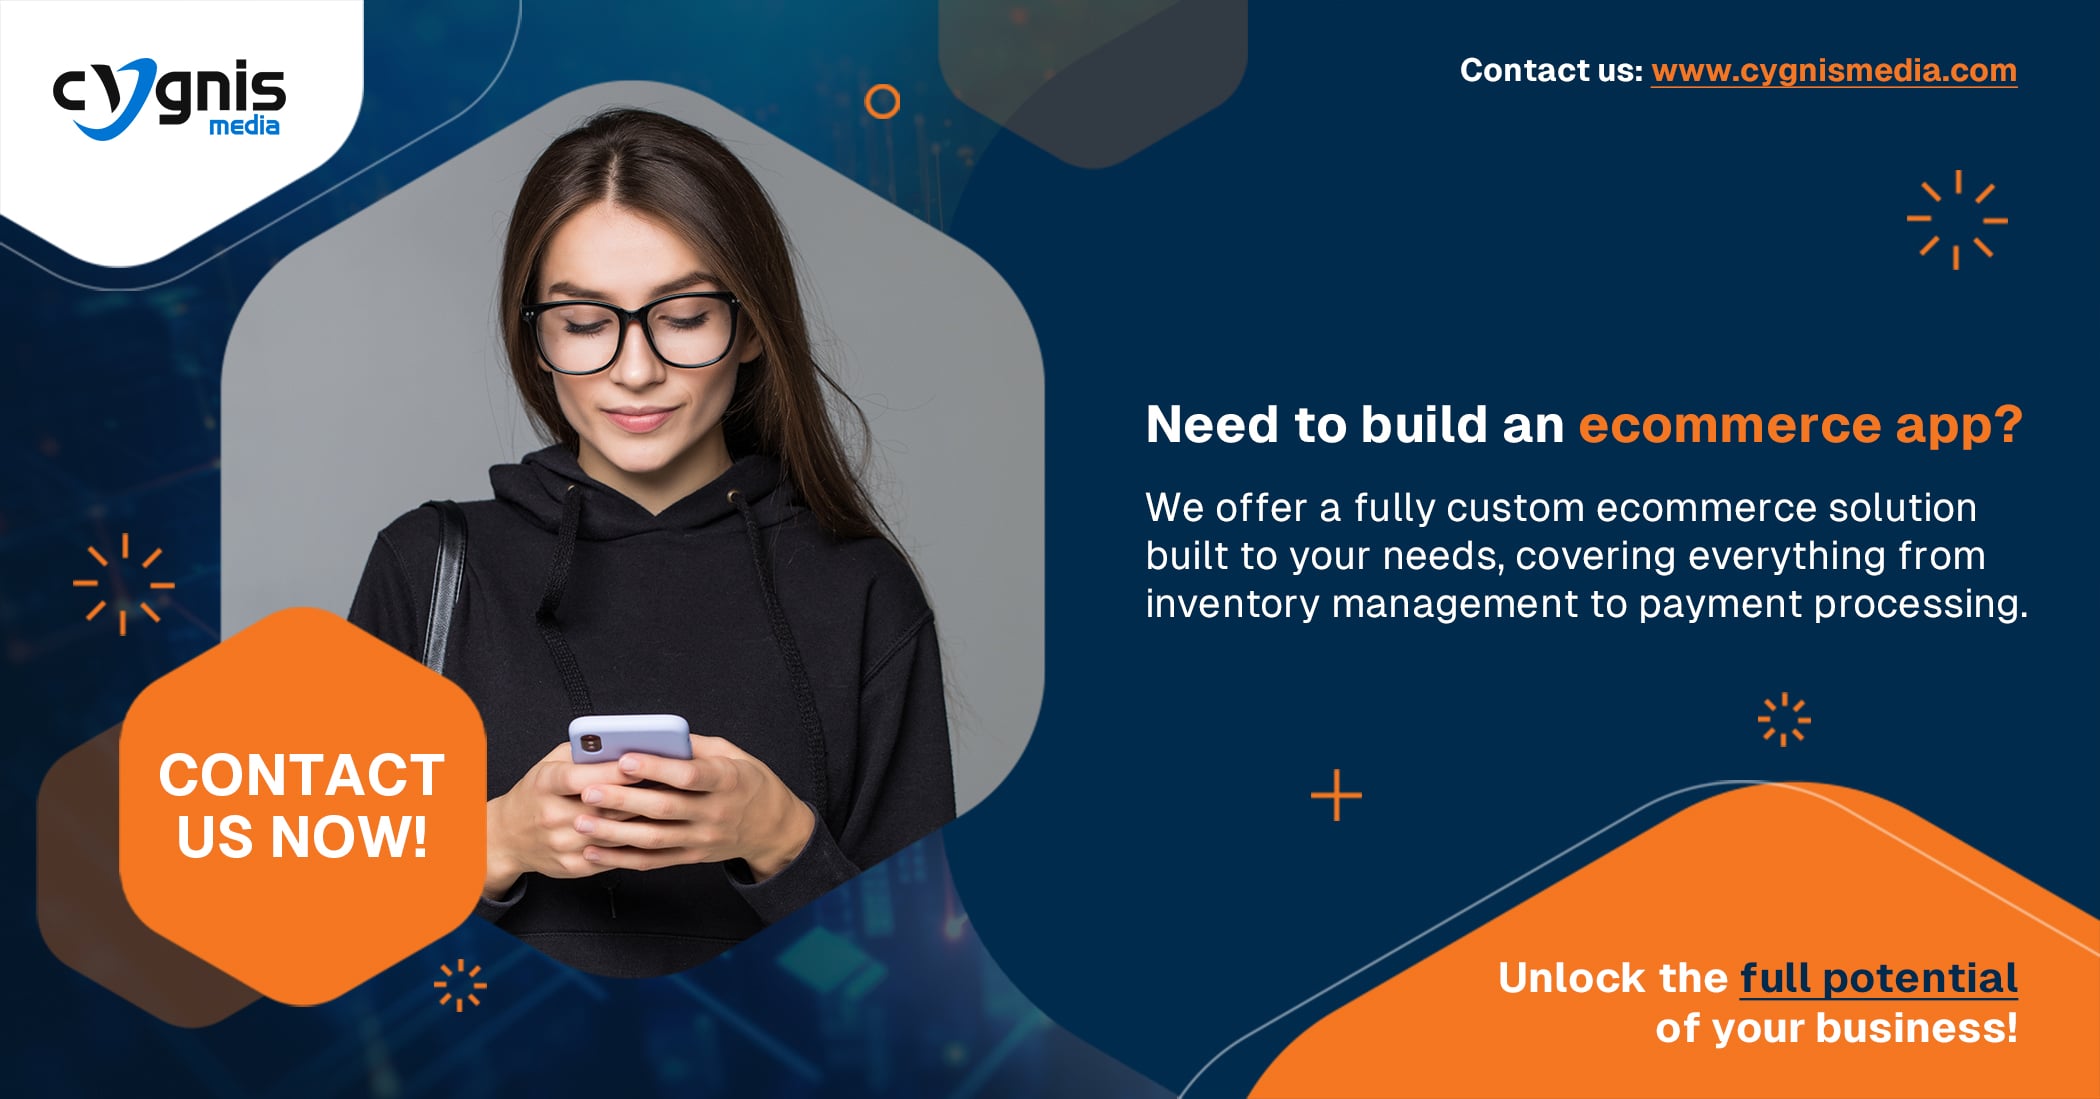 Need to build an ecommerce app? Contact us